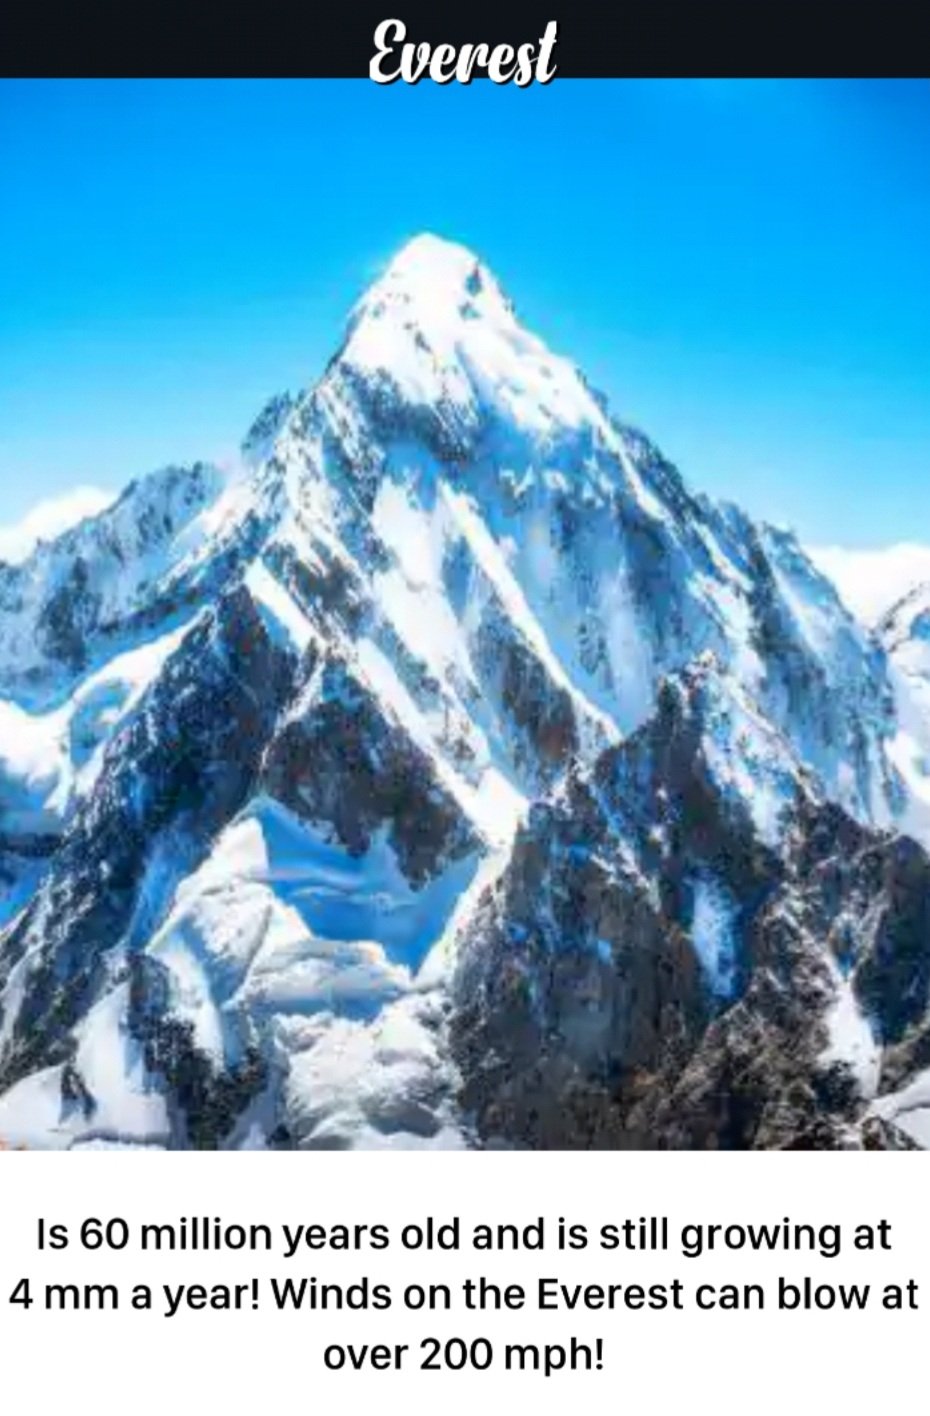 Who is Mount Everest named after?